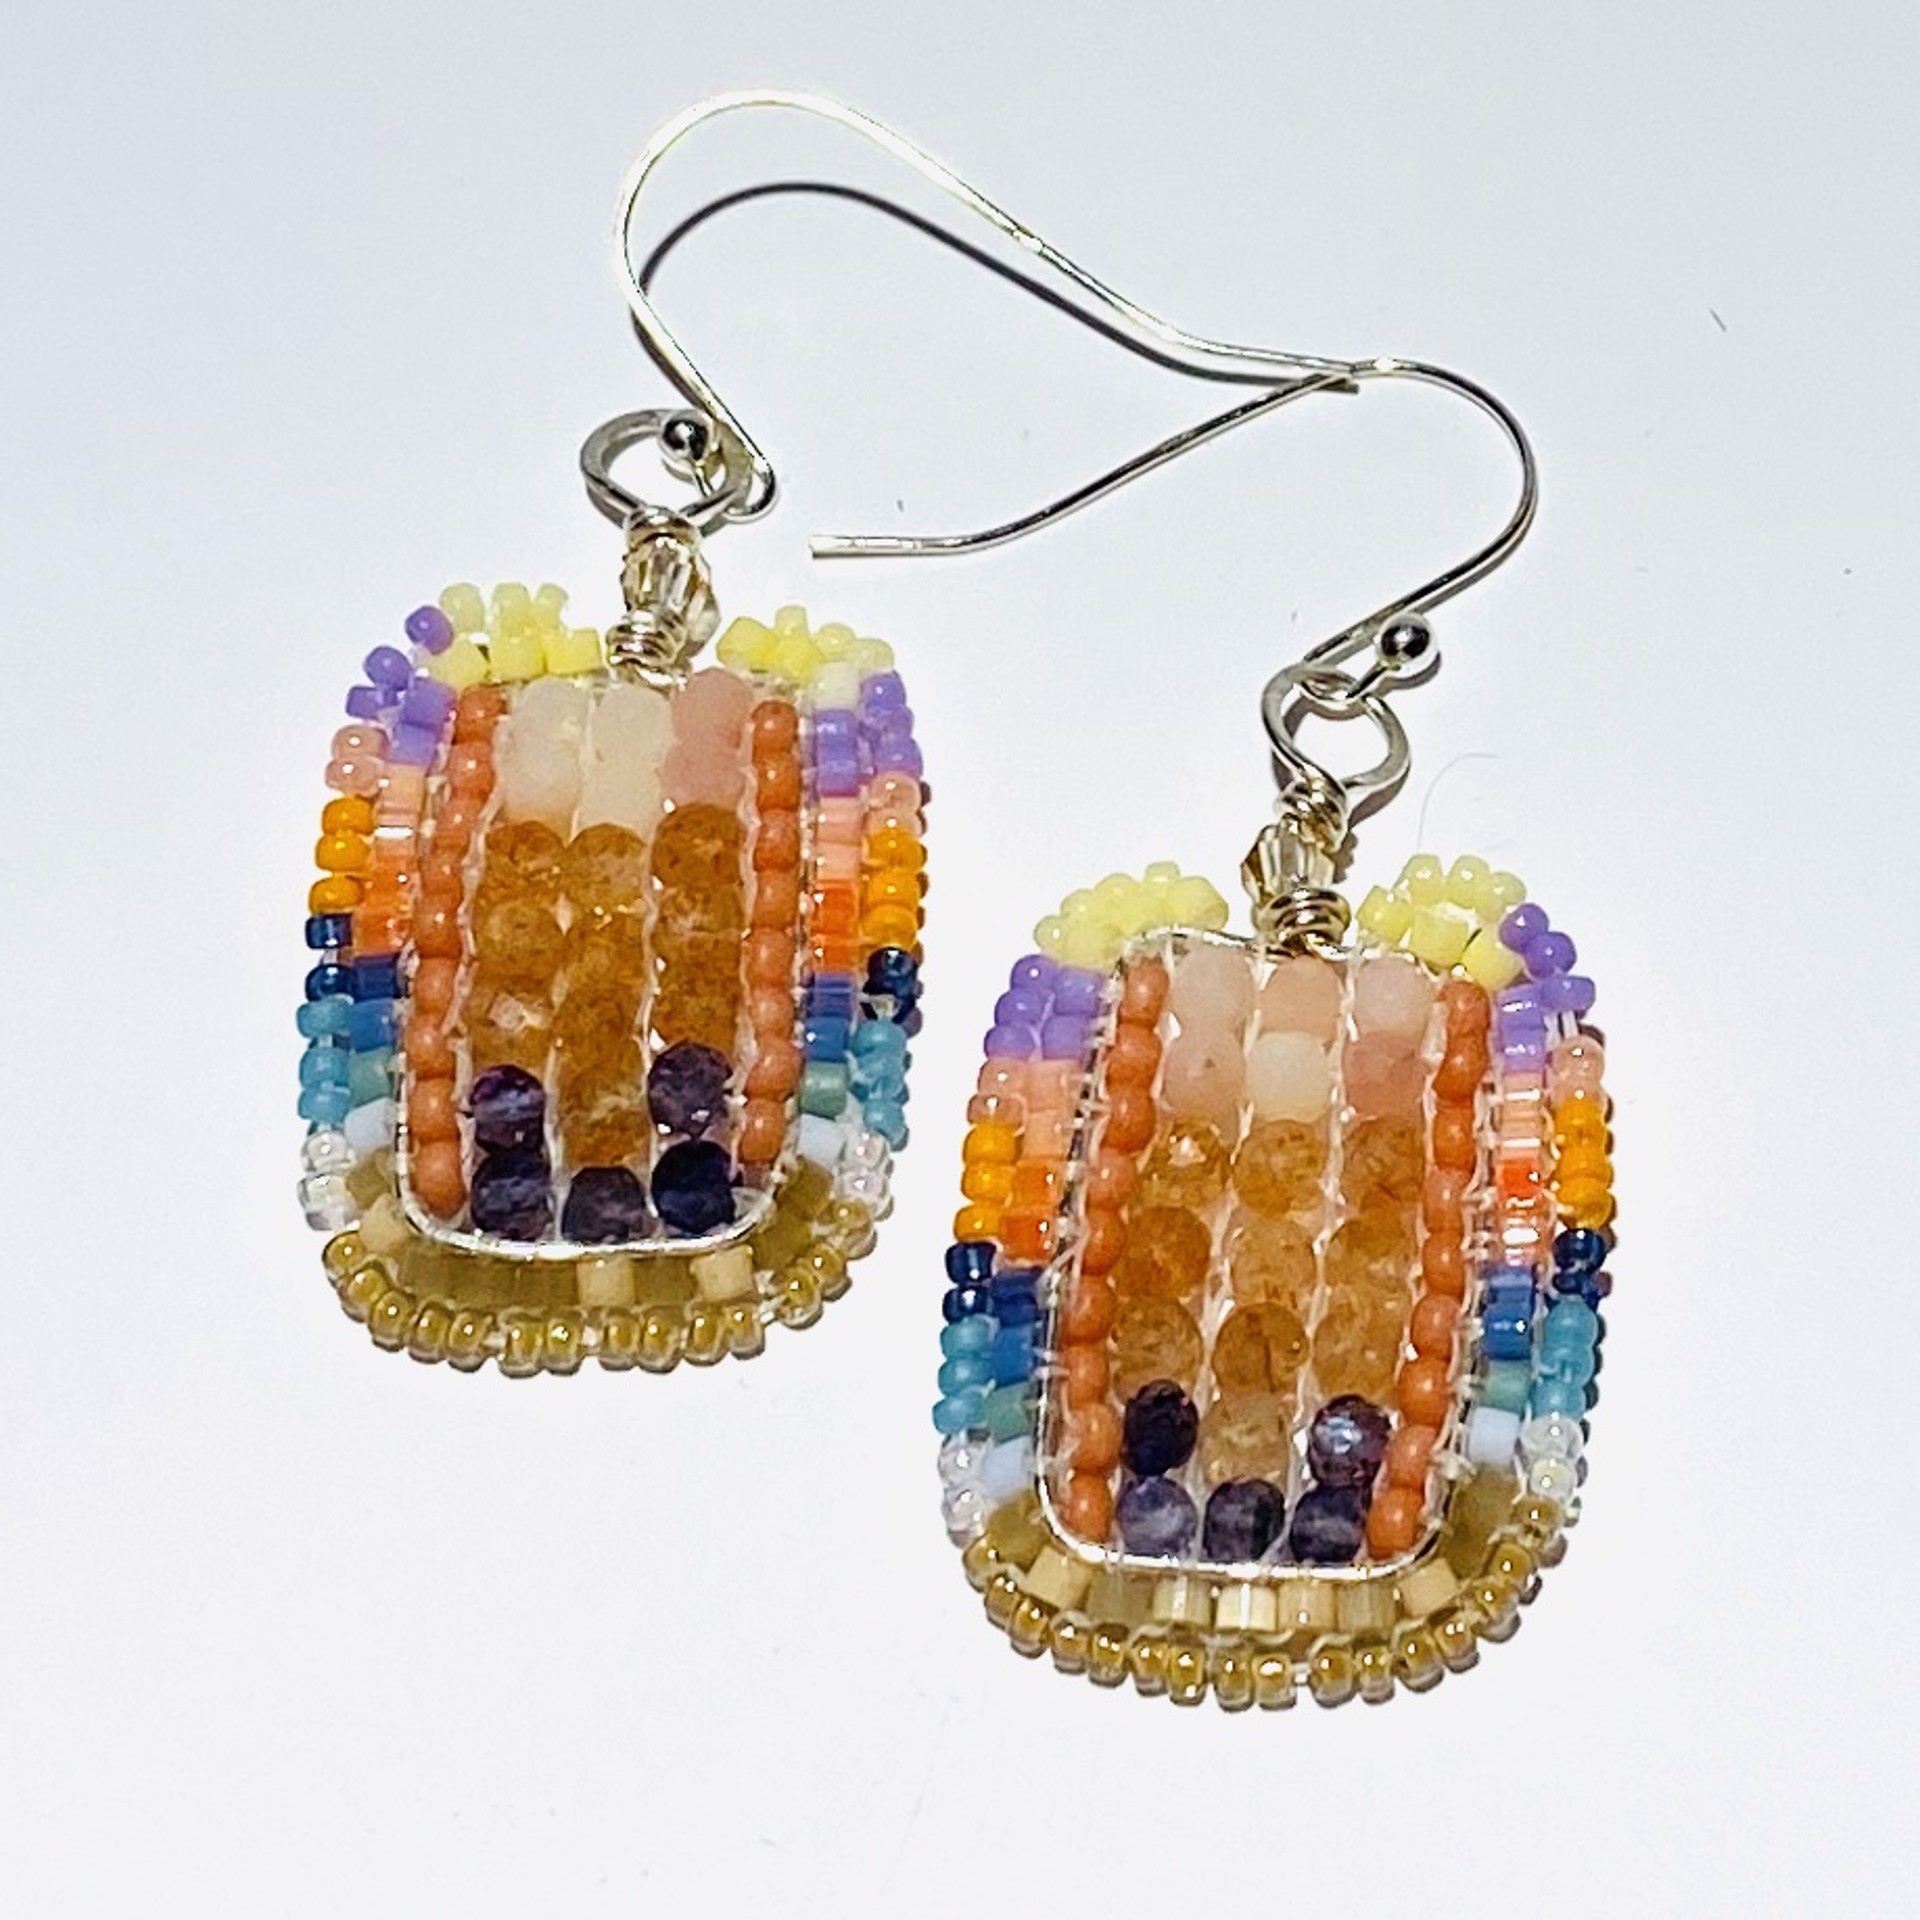 "Peaceful Morning" Earrings by Barbara Duimstra